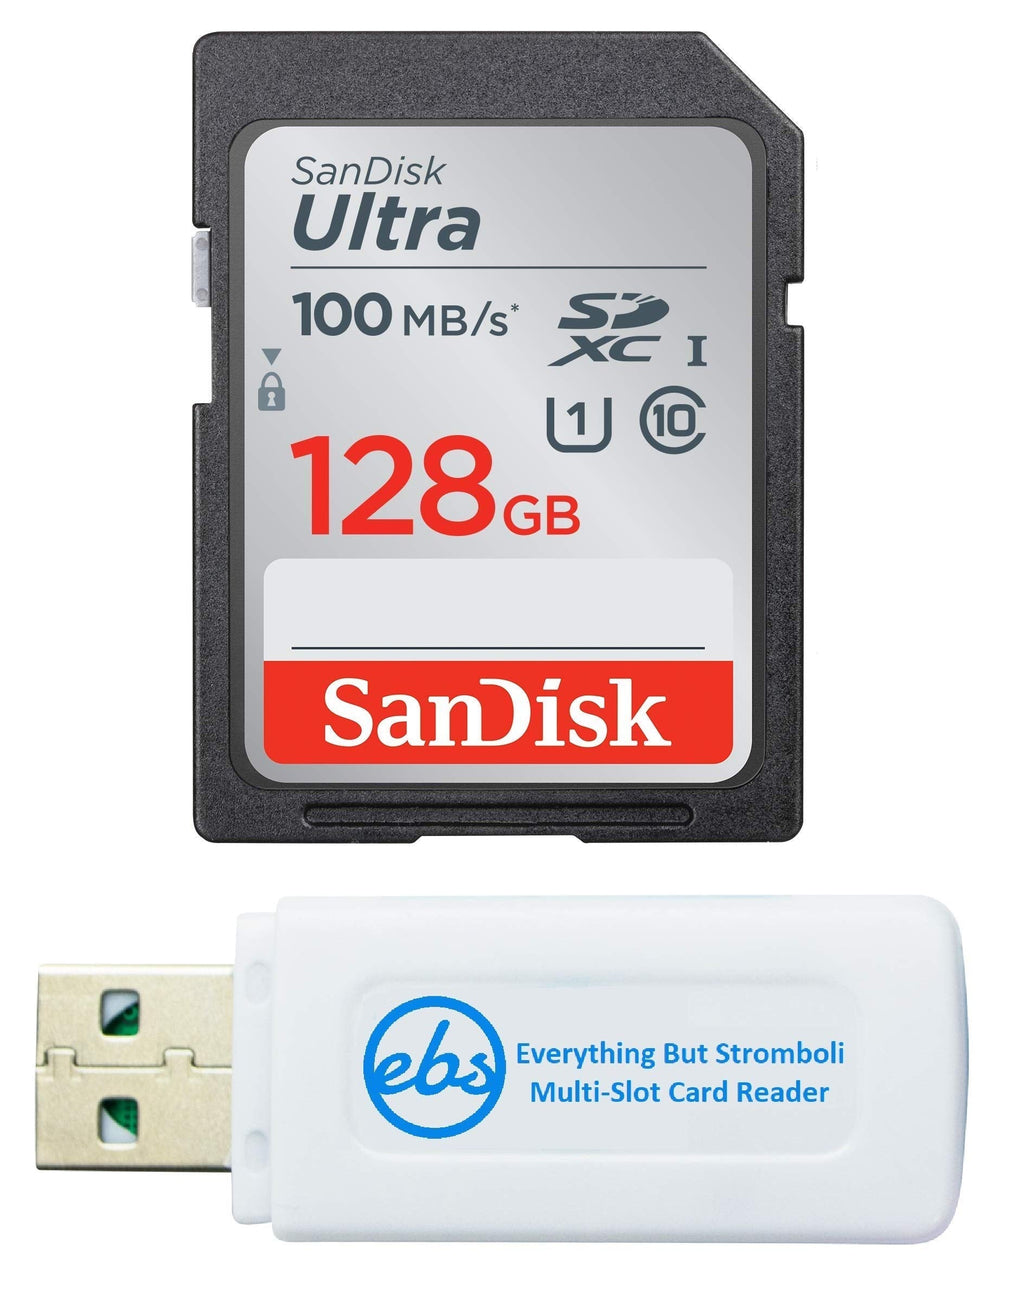 SanDisk Ultra SDXC 128GB SD Card for Olympus Mirrorless Camera Works with OM-D E-M10 IV, OM-D E-M5 III (SDSDUNR-128G-GN6IN) Bundle with (1) Everything But Stromboli SD & Micro Memory Card Reader